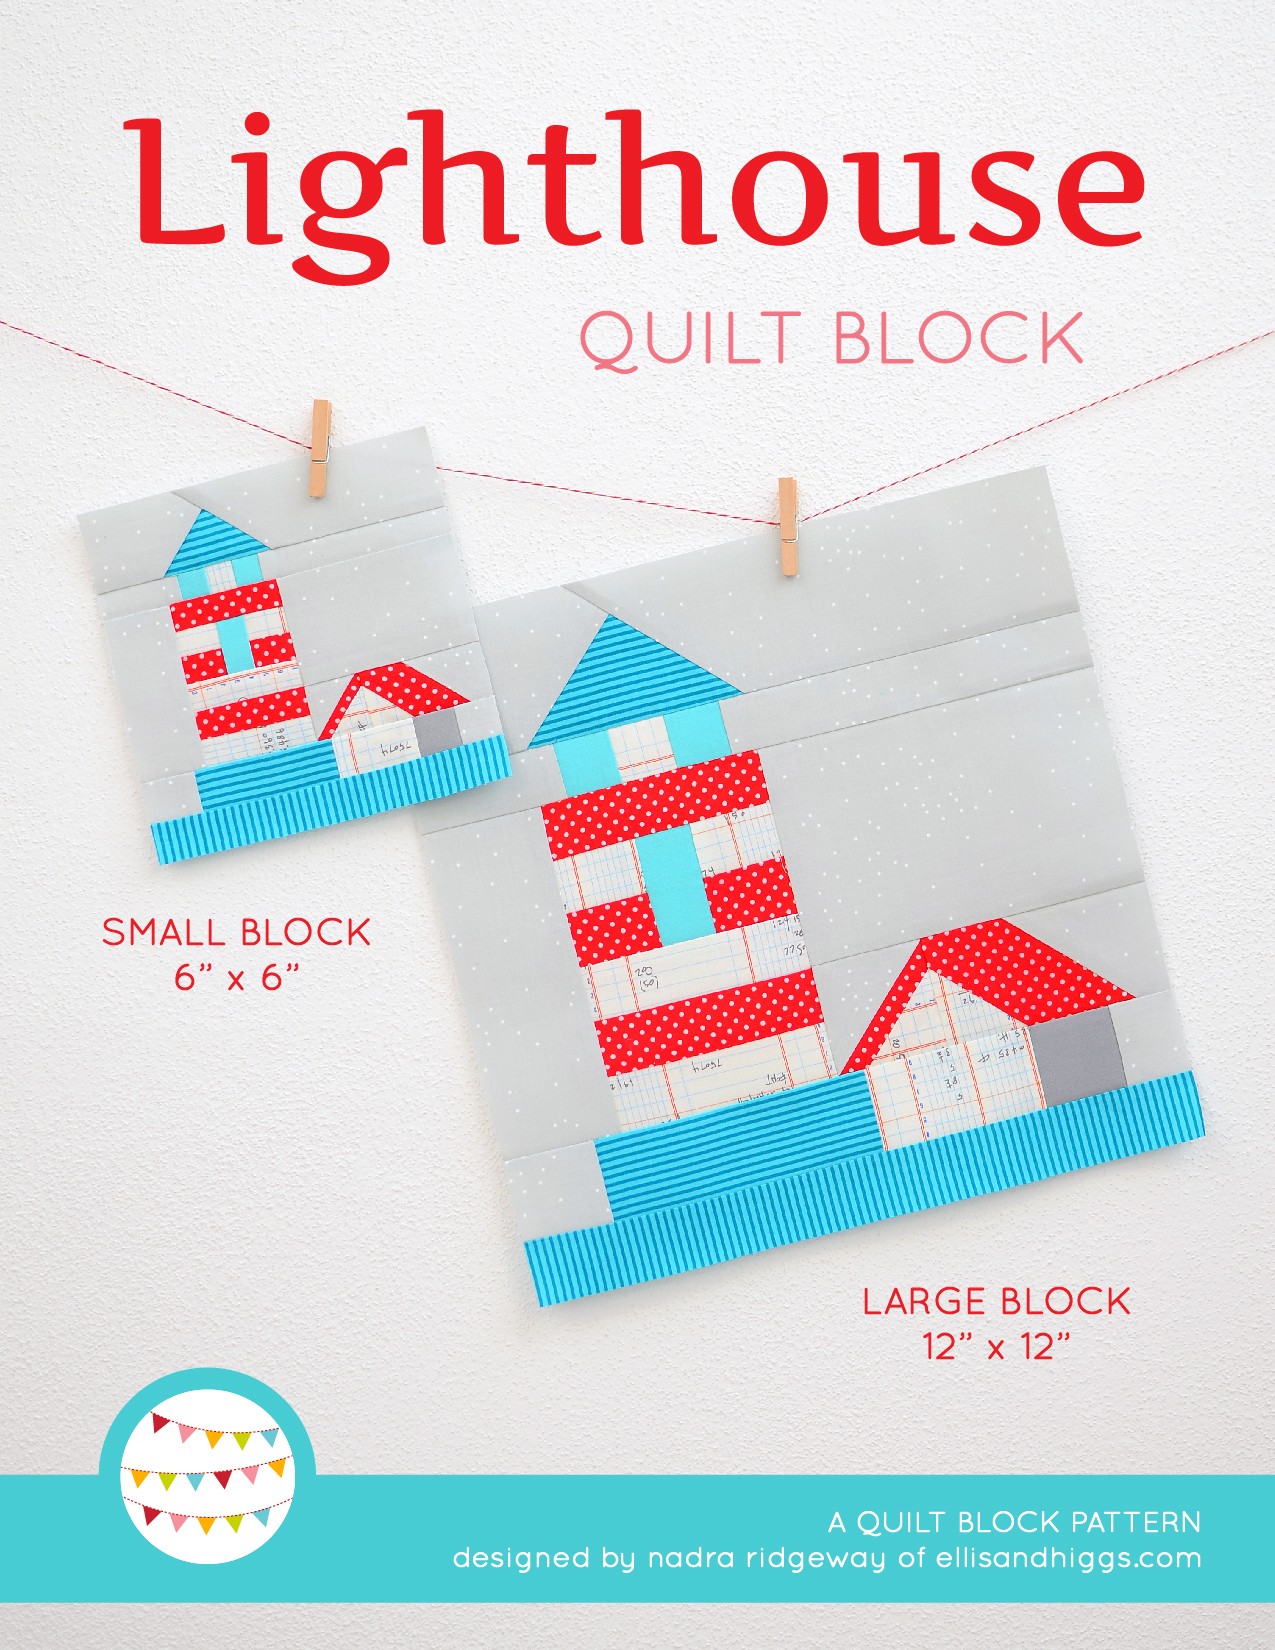 Lighthouse quilt block in two sizes hanging on a wall